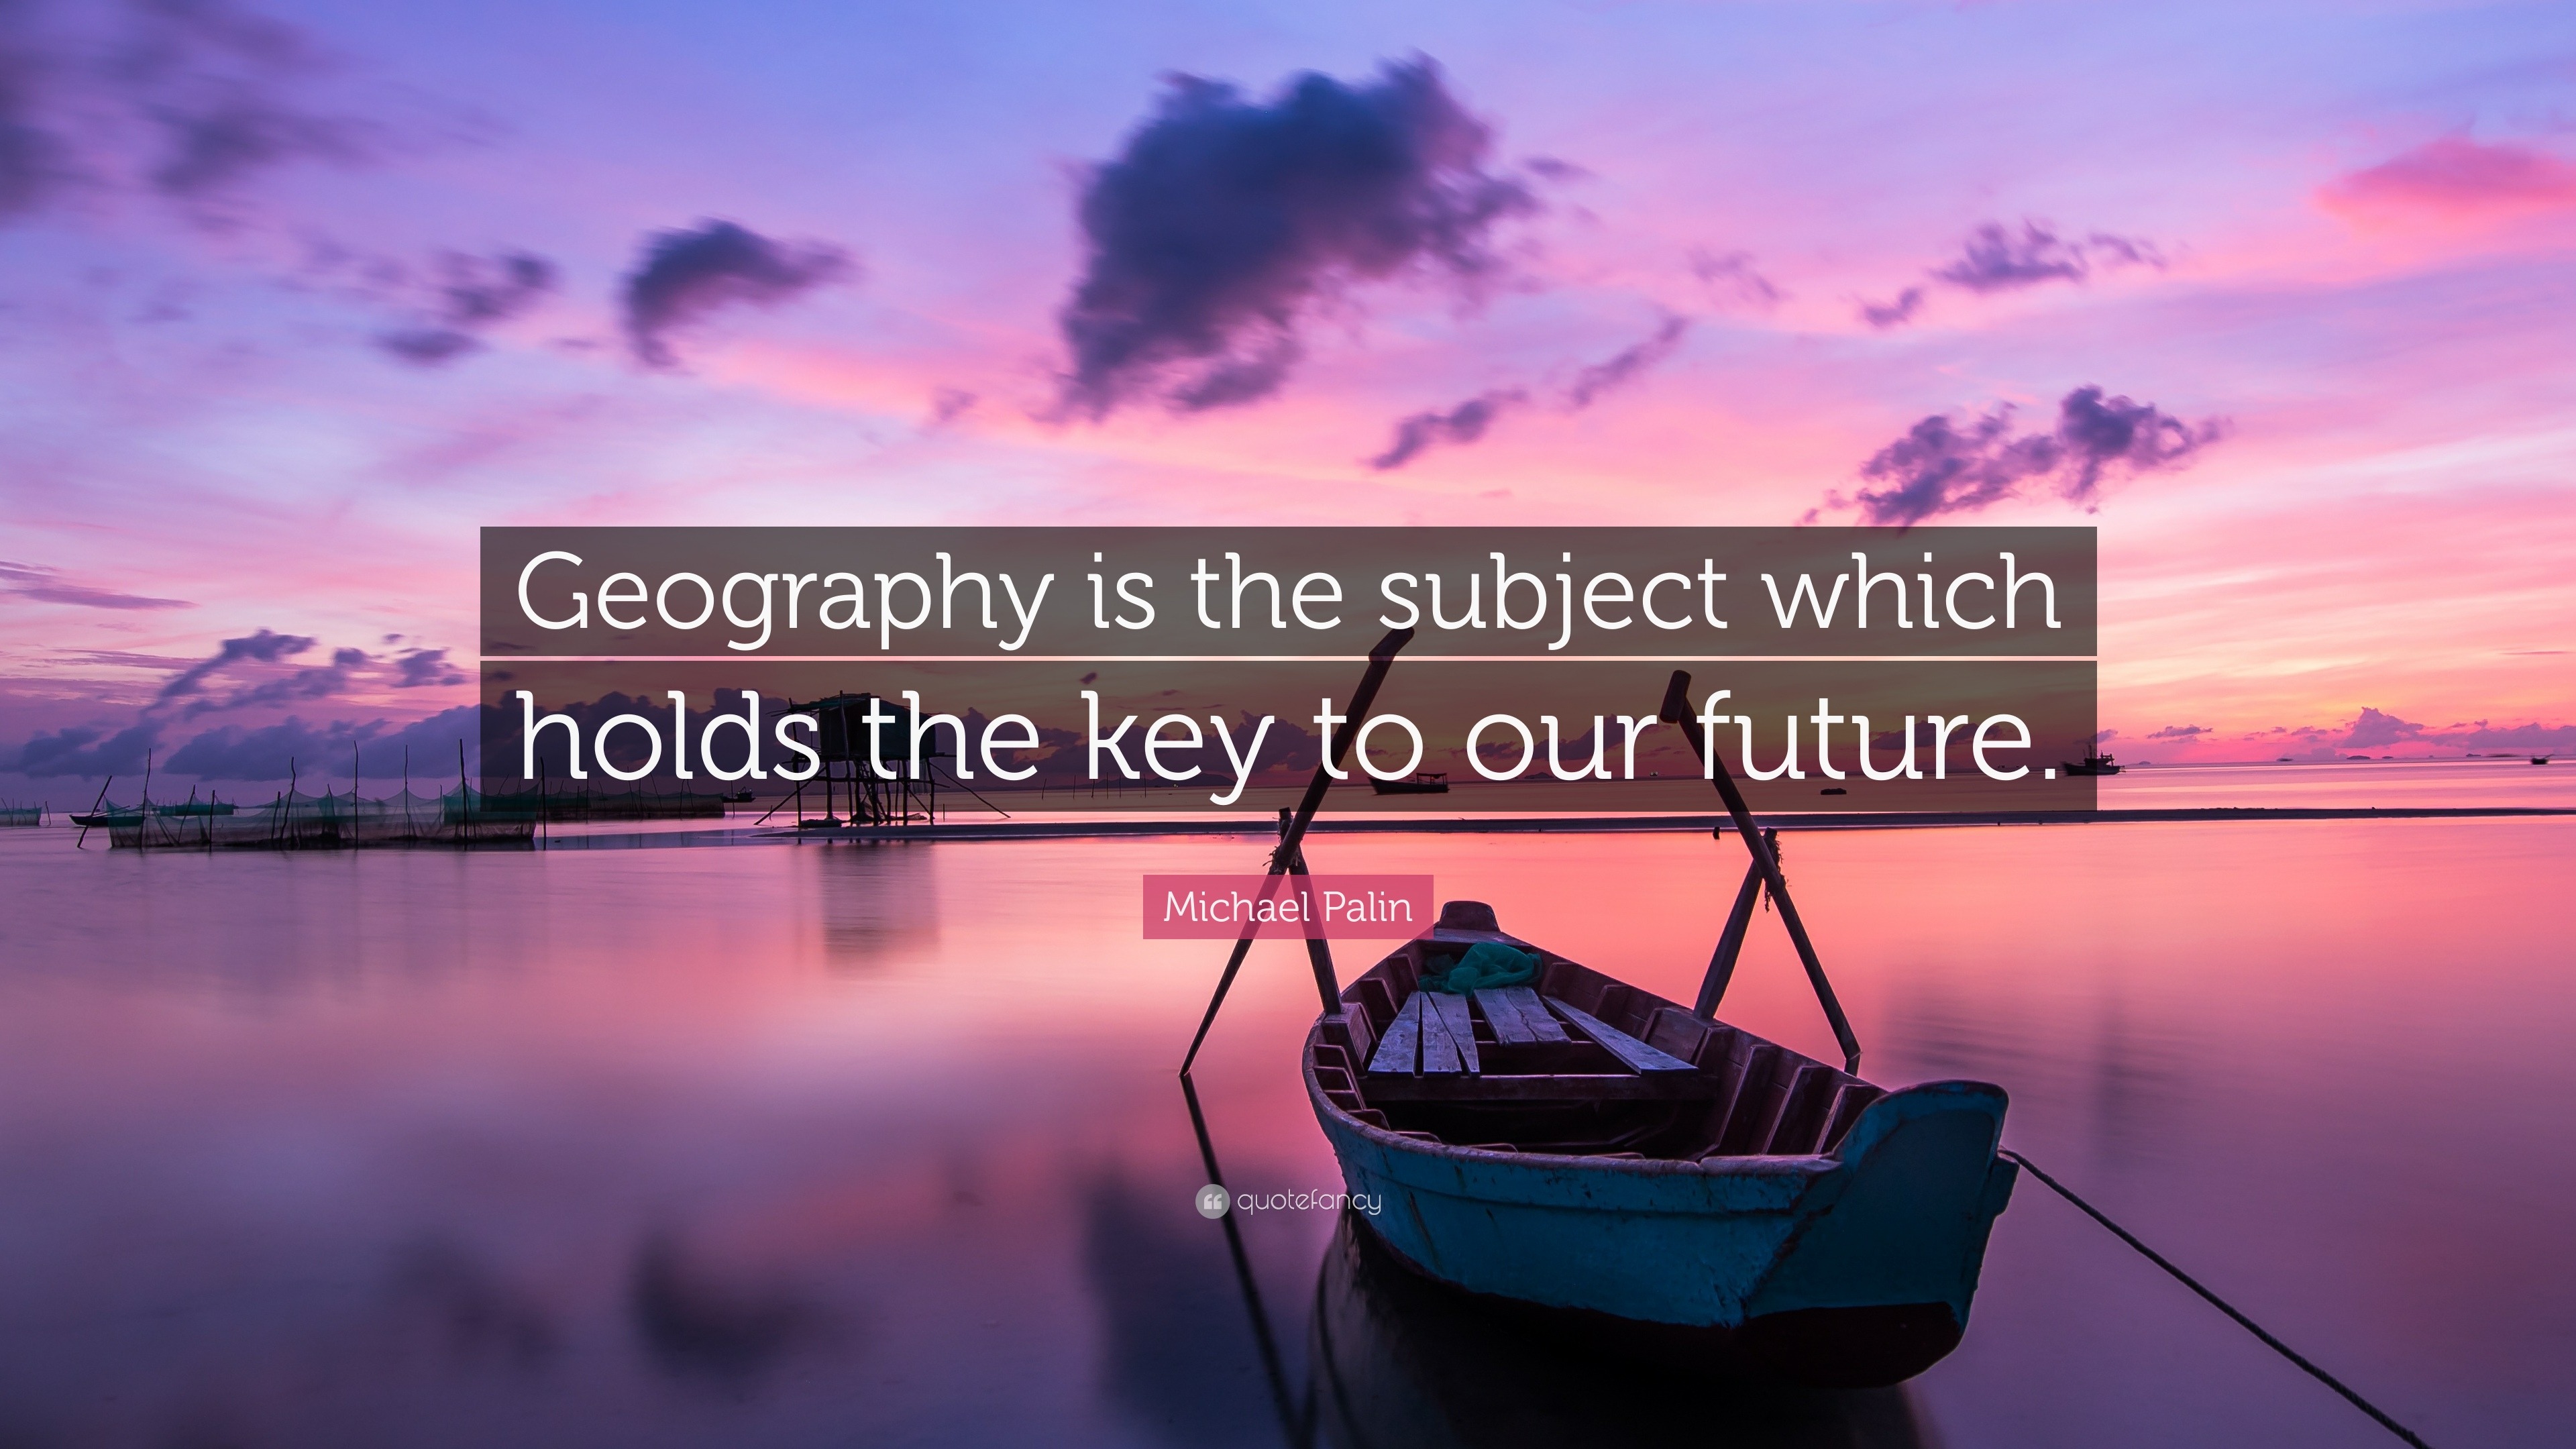 1797464 Michael Palin Quote Geography is the subject which holds the key